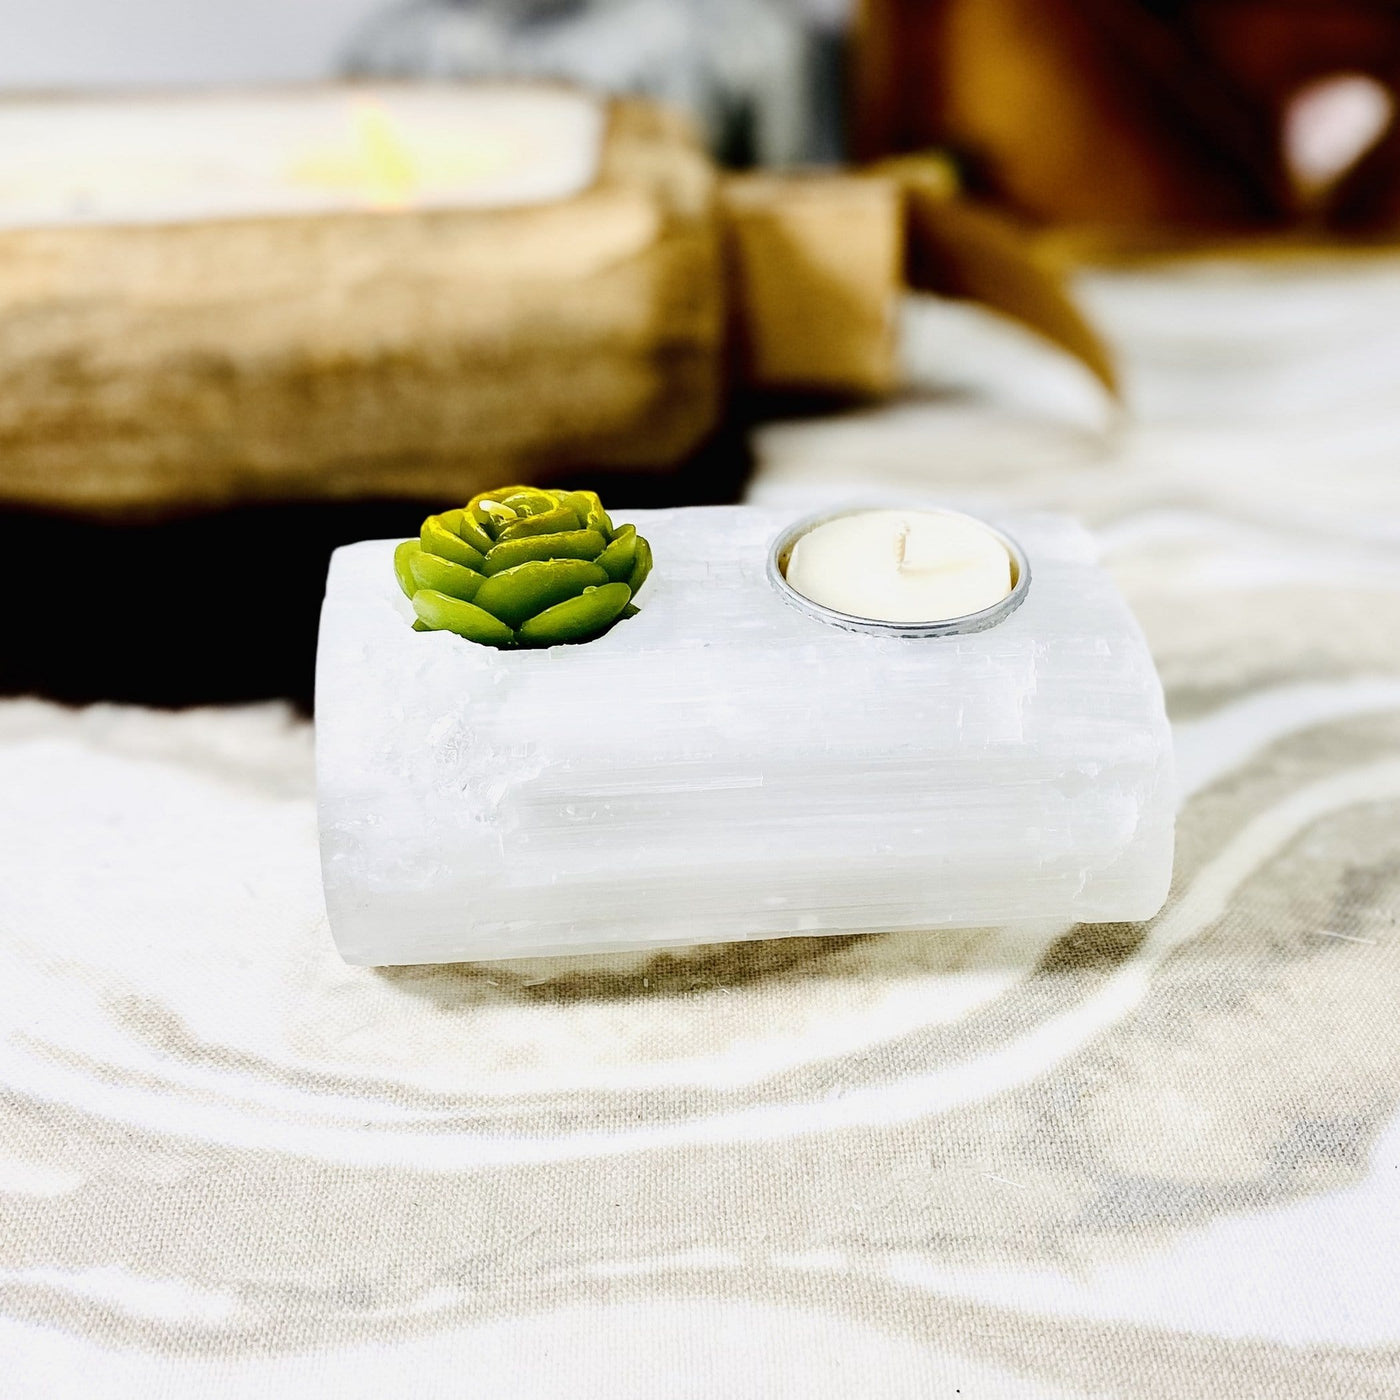 selenite log candle holder on display with candles (not included with purchase)